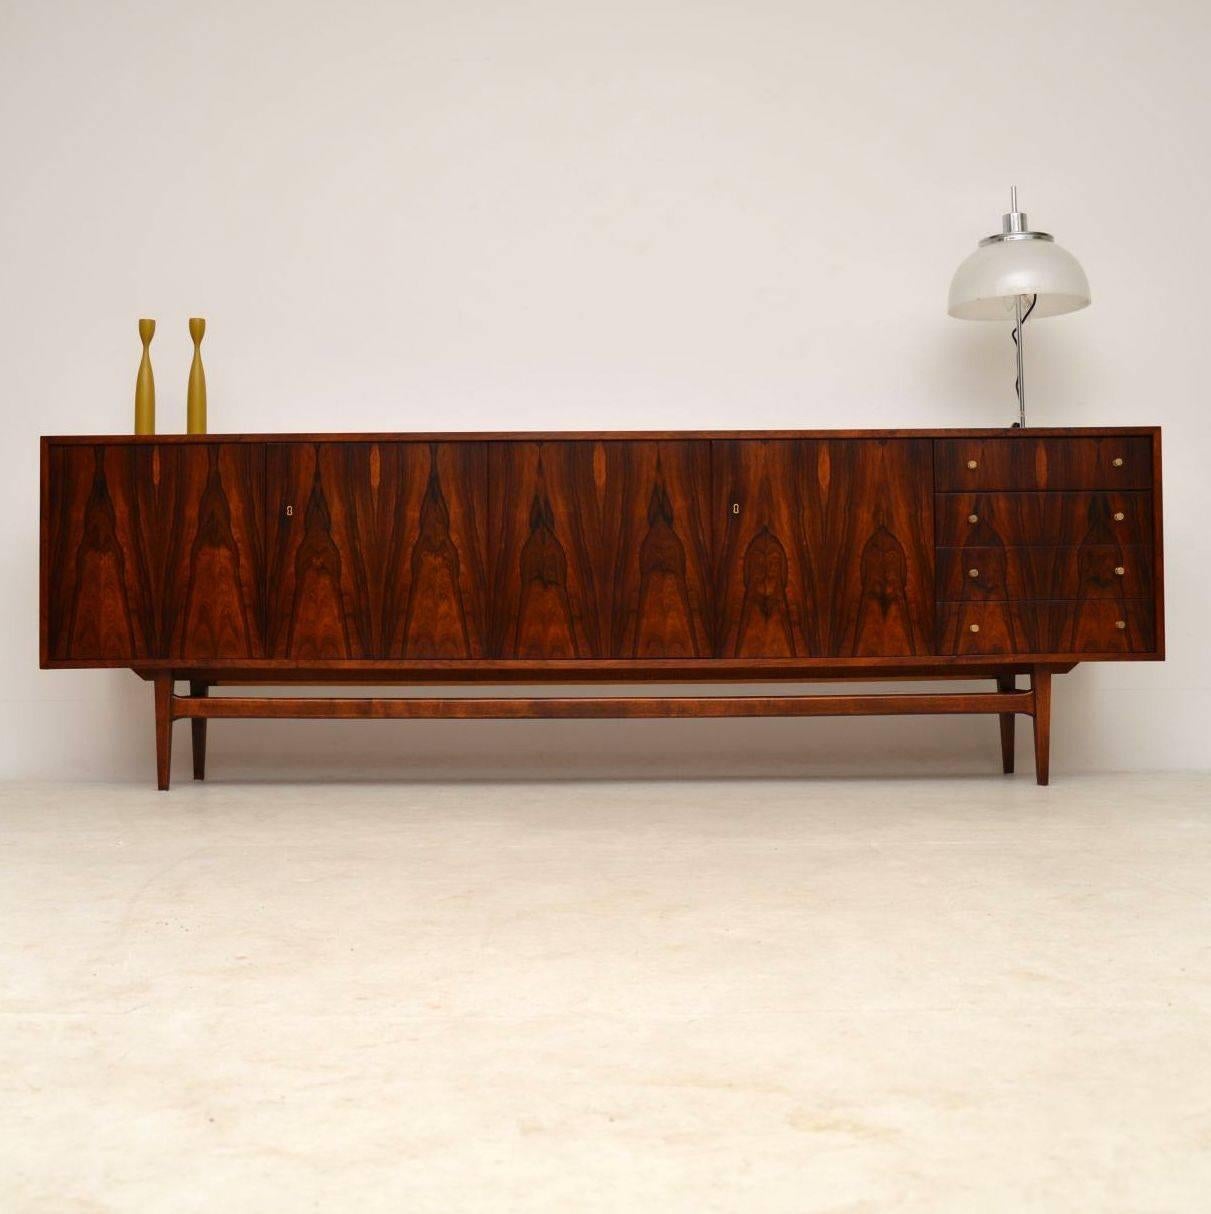 A spectacular vintage sideboard, this was made in Denmark and it dates from the 1960s-1970s. It is beautifully styled on splayed legs, with lovely brass handles. The grain patterns are phenomenal throughout and the color is gorgeous as well. We have